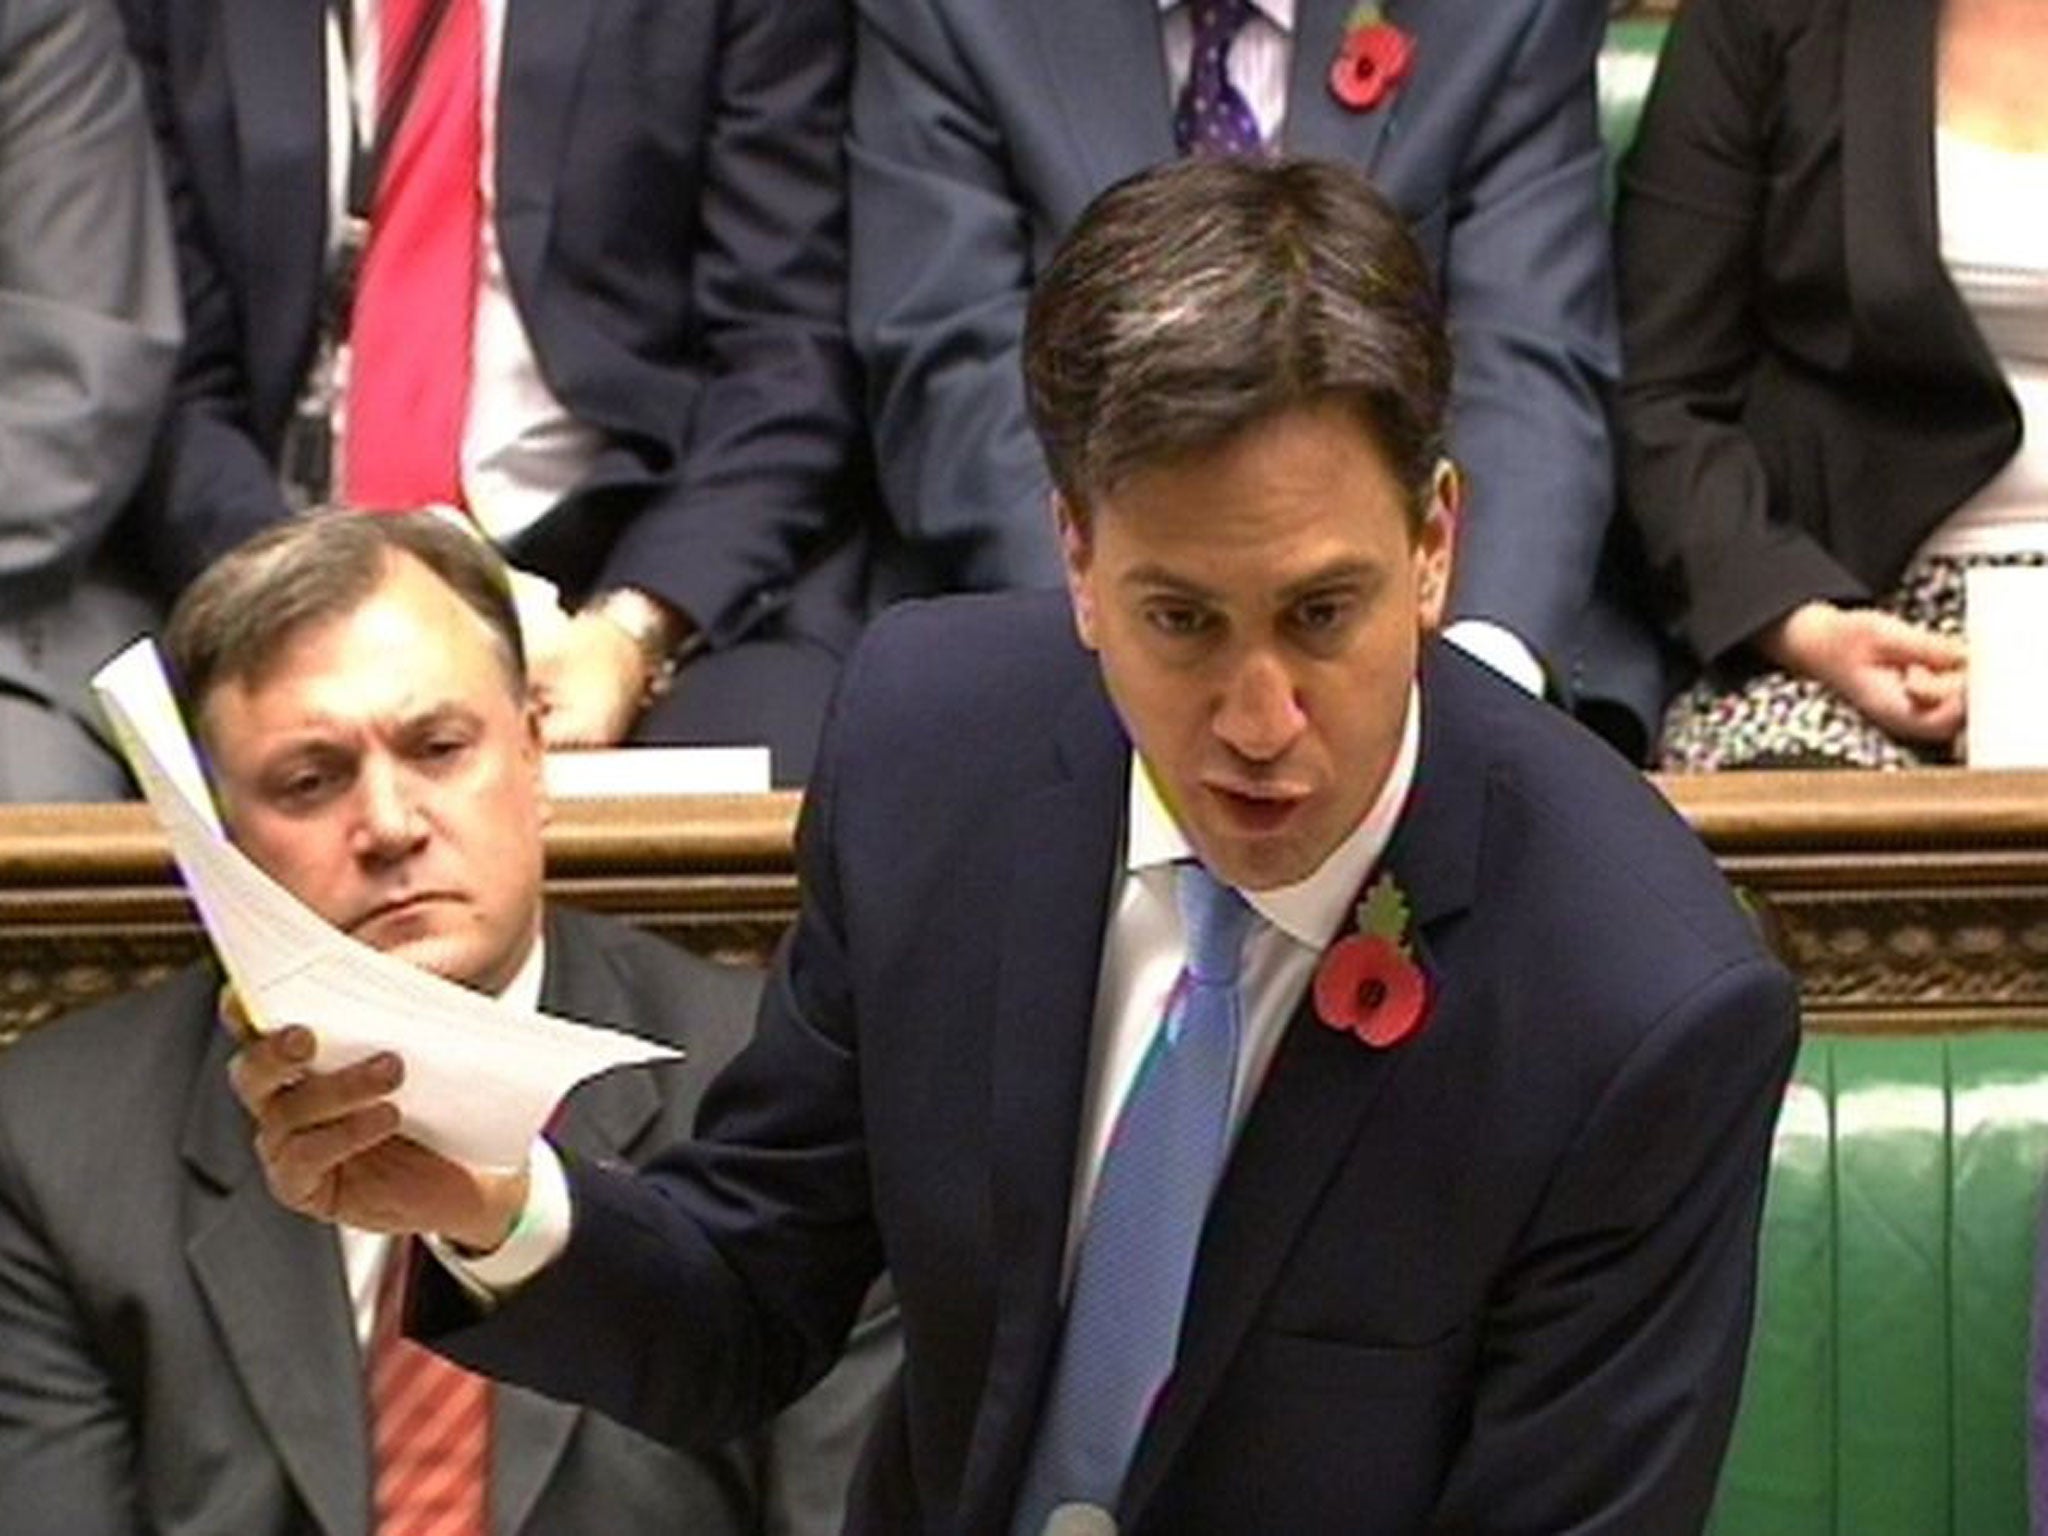 Ed Miliband has called David Cameron ‘clueless’ about the crisis facing the NHS